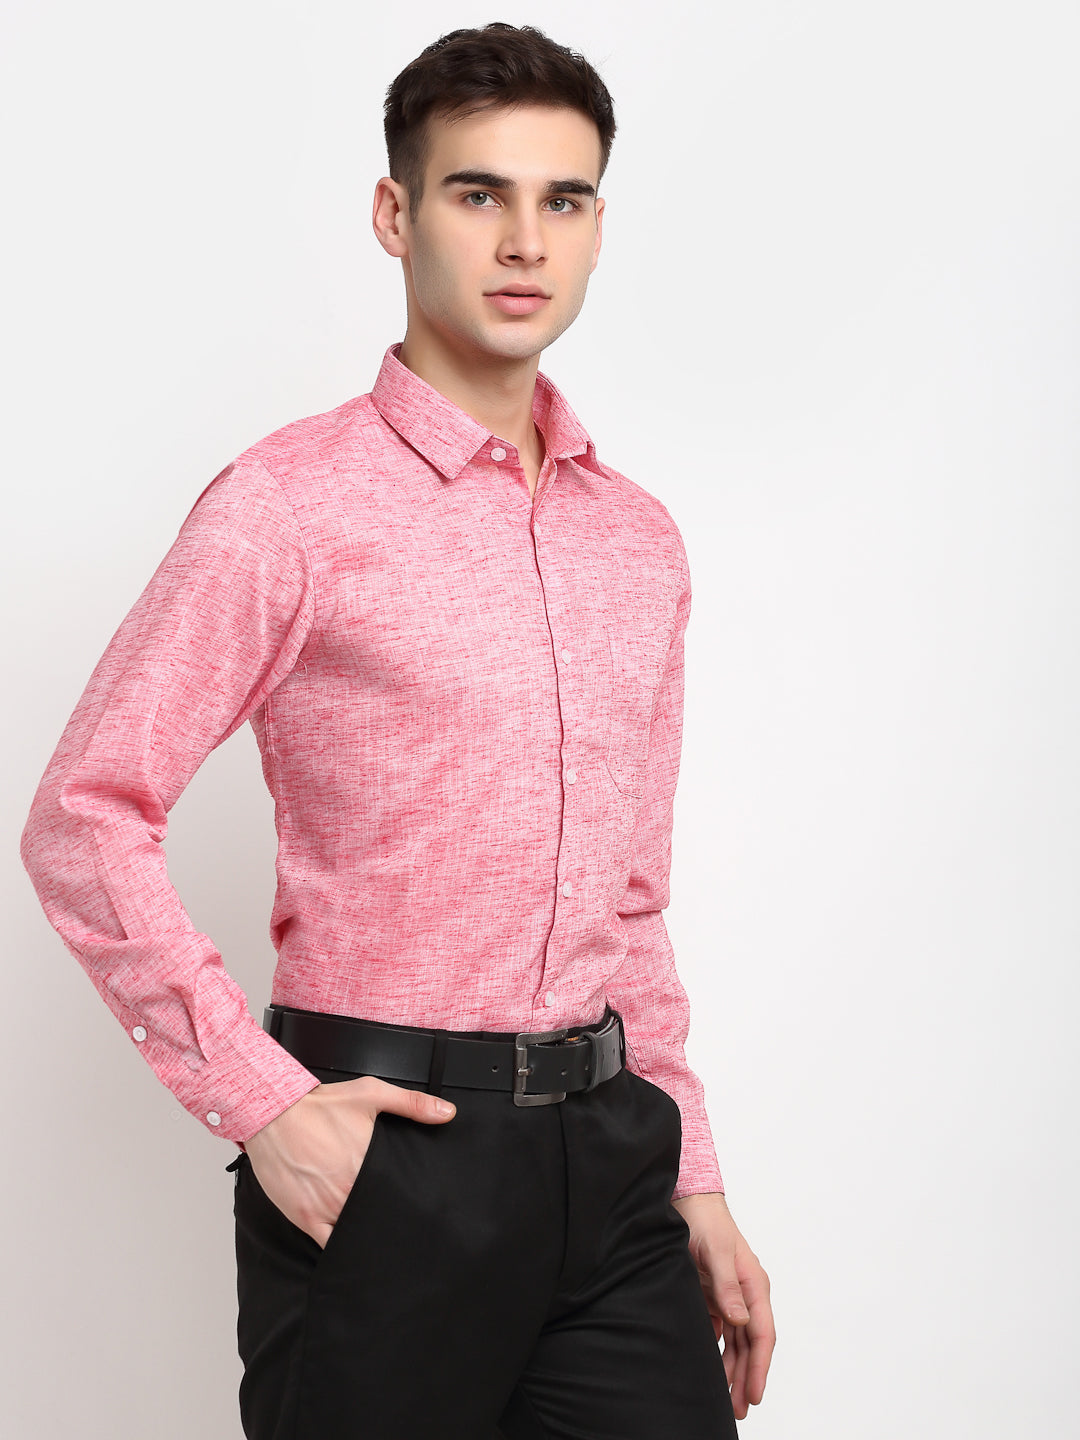 Men's Red Solid Cotton Formal Shirt ( SF 782Red ) - Jainish